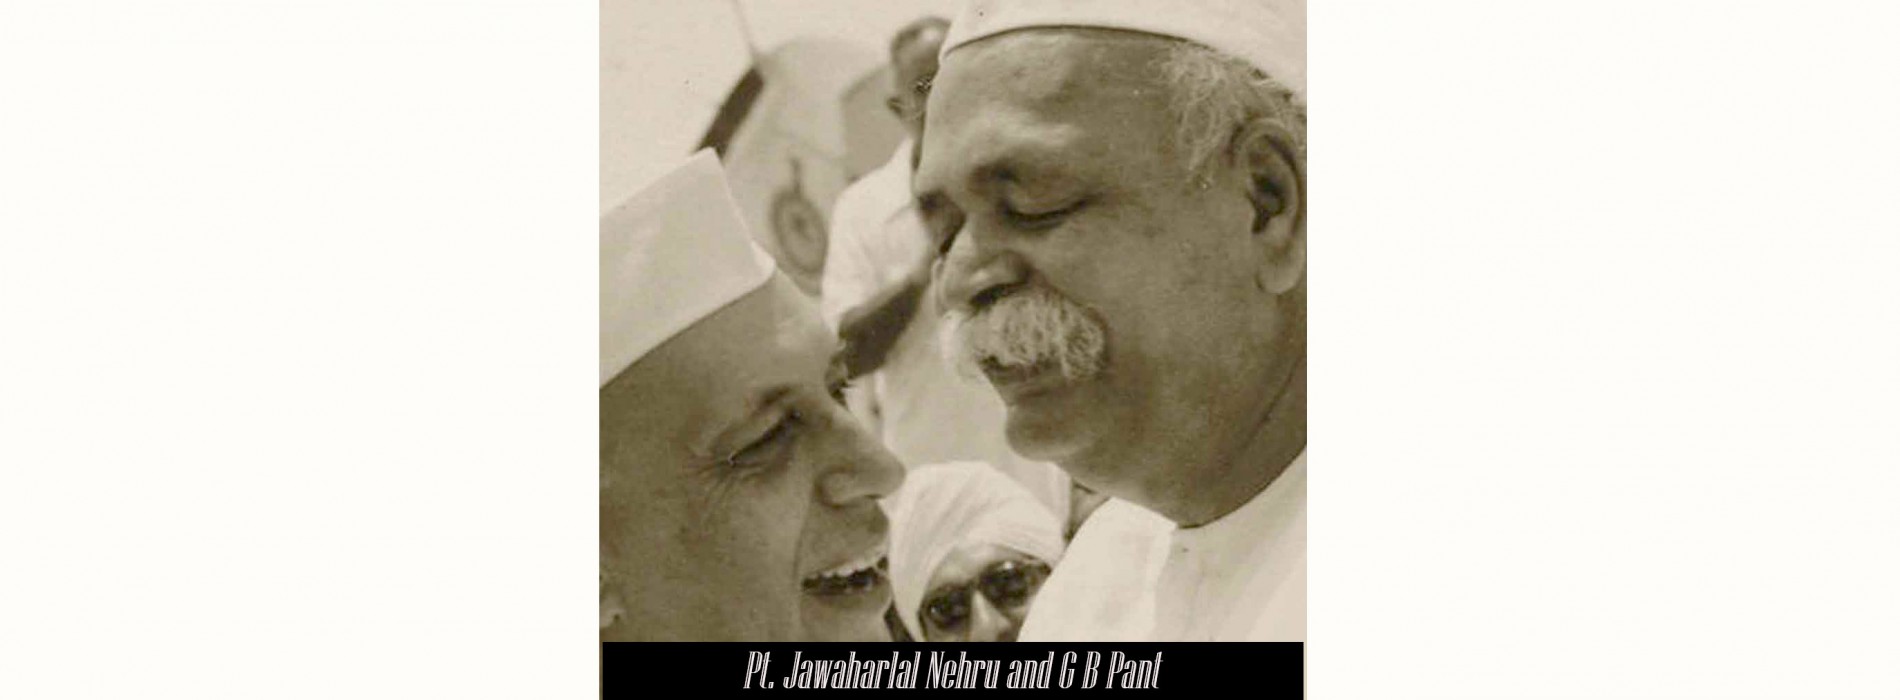 Nation remembers Pandit Govind Ballabh Pant on his 131st birth anniversary